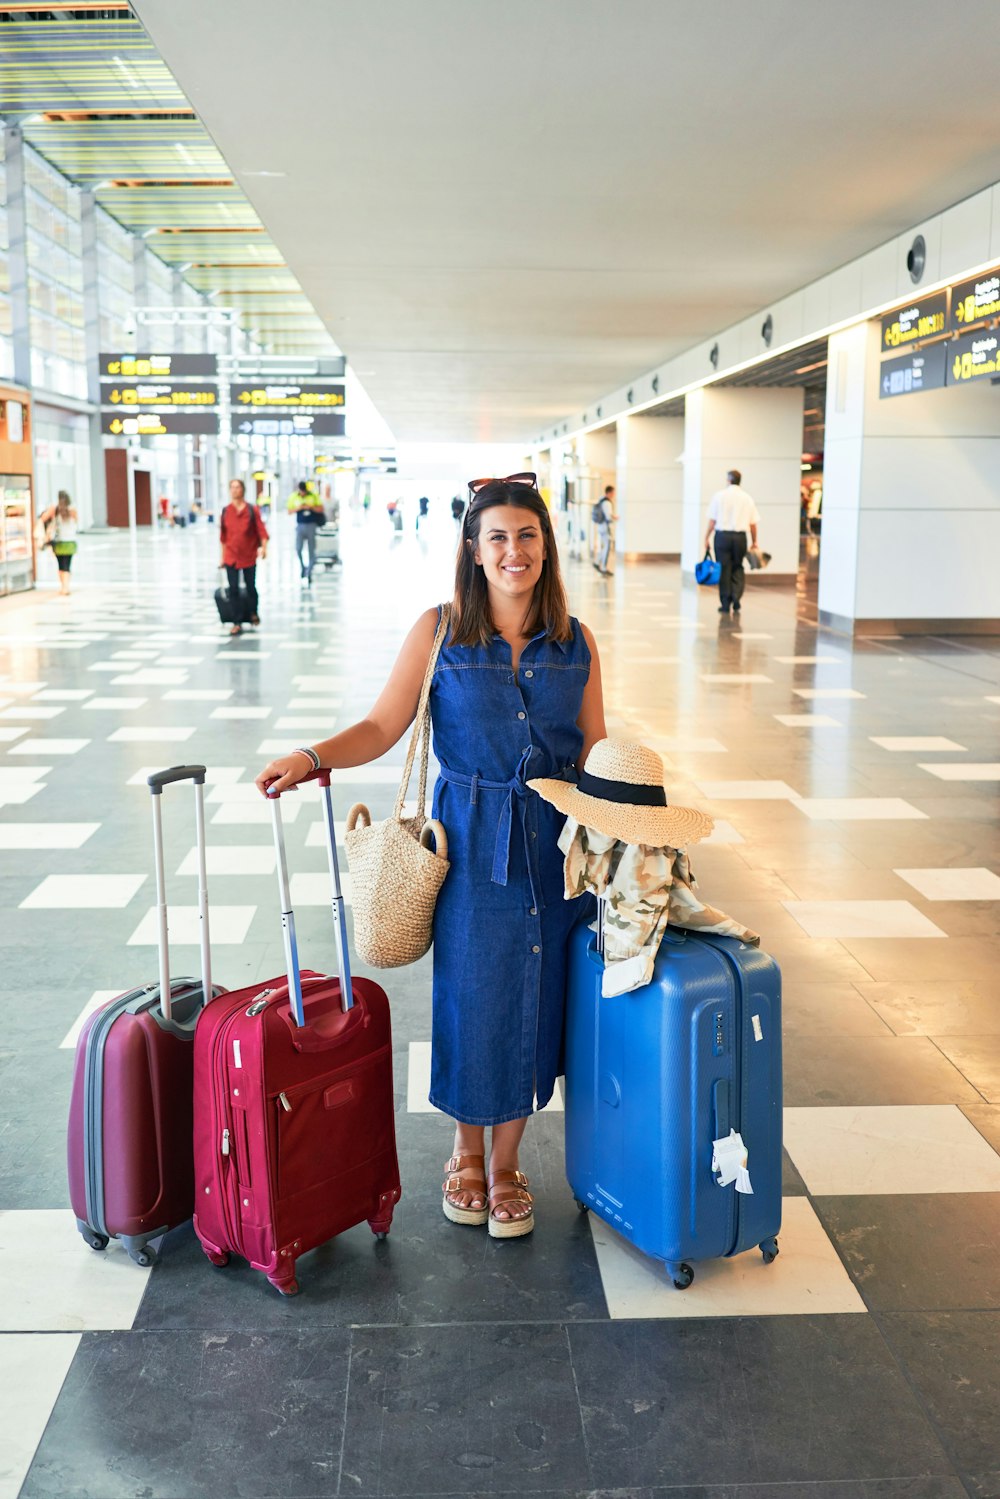 Young beautiful woman at the airport standing with suitcases ready for a vacation trip